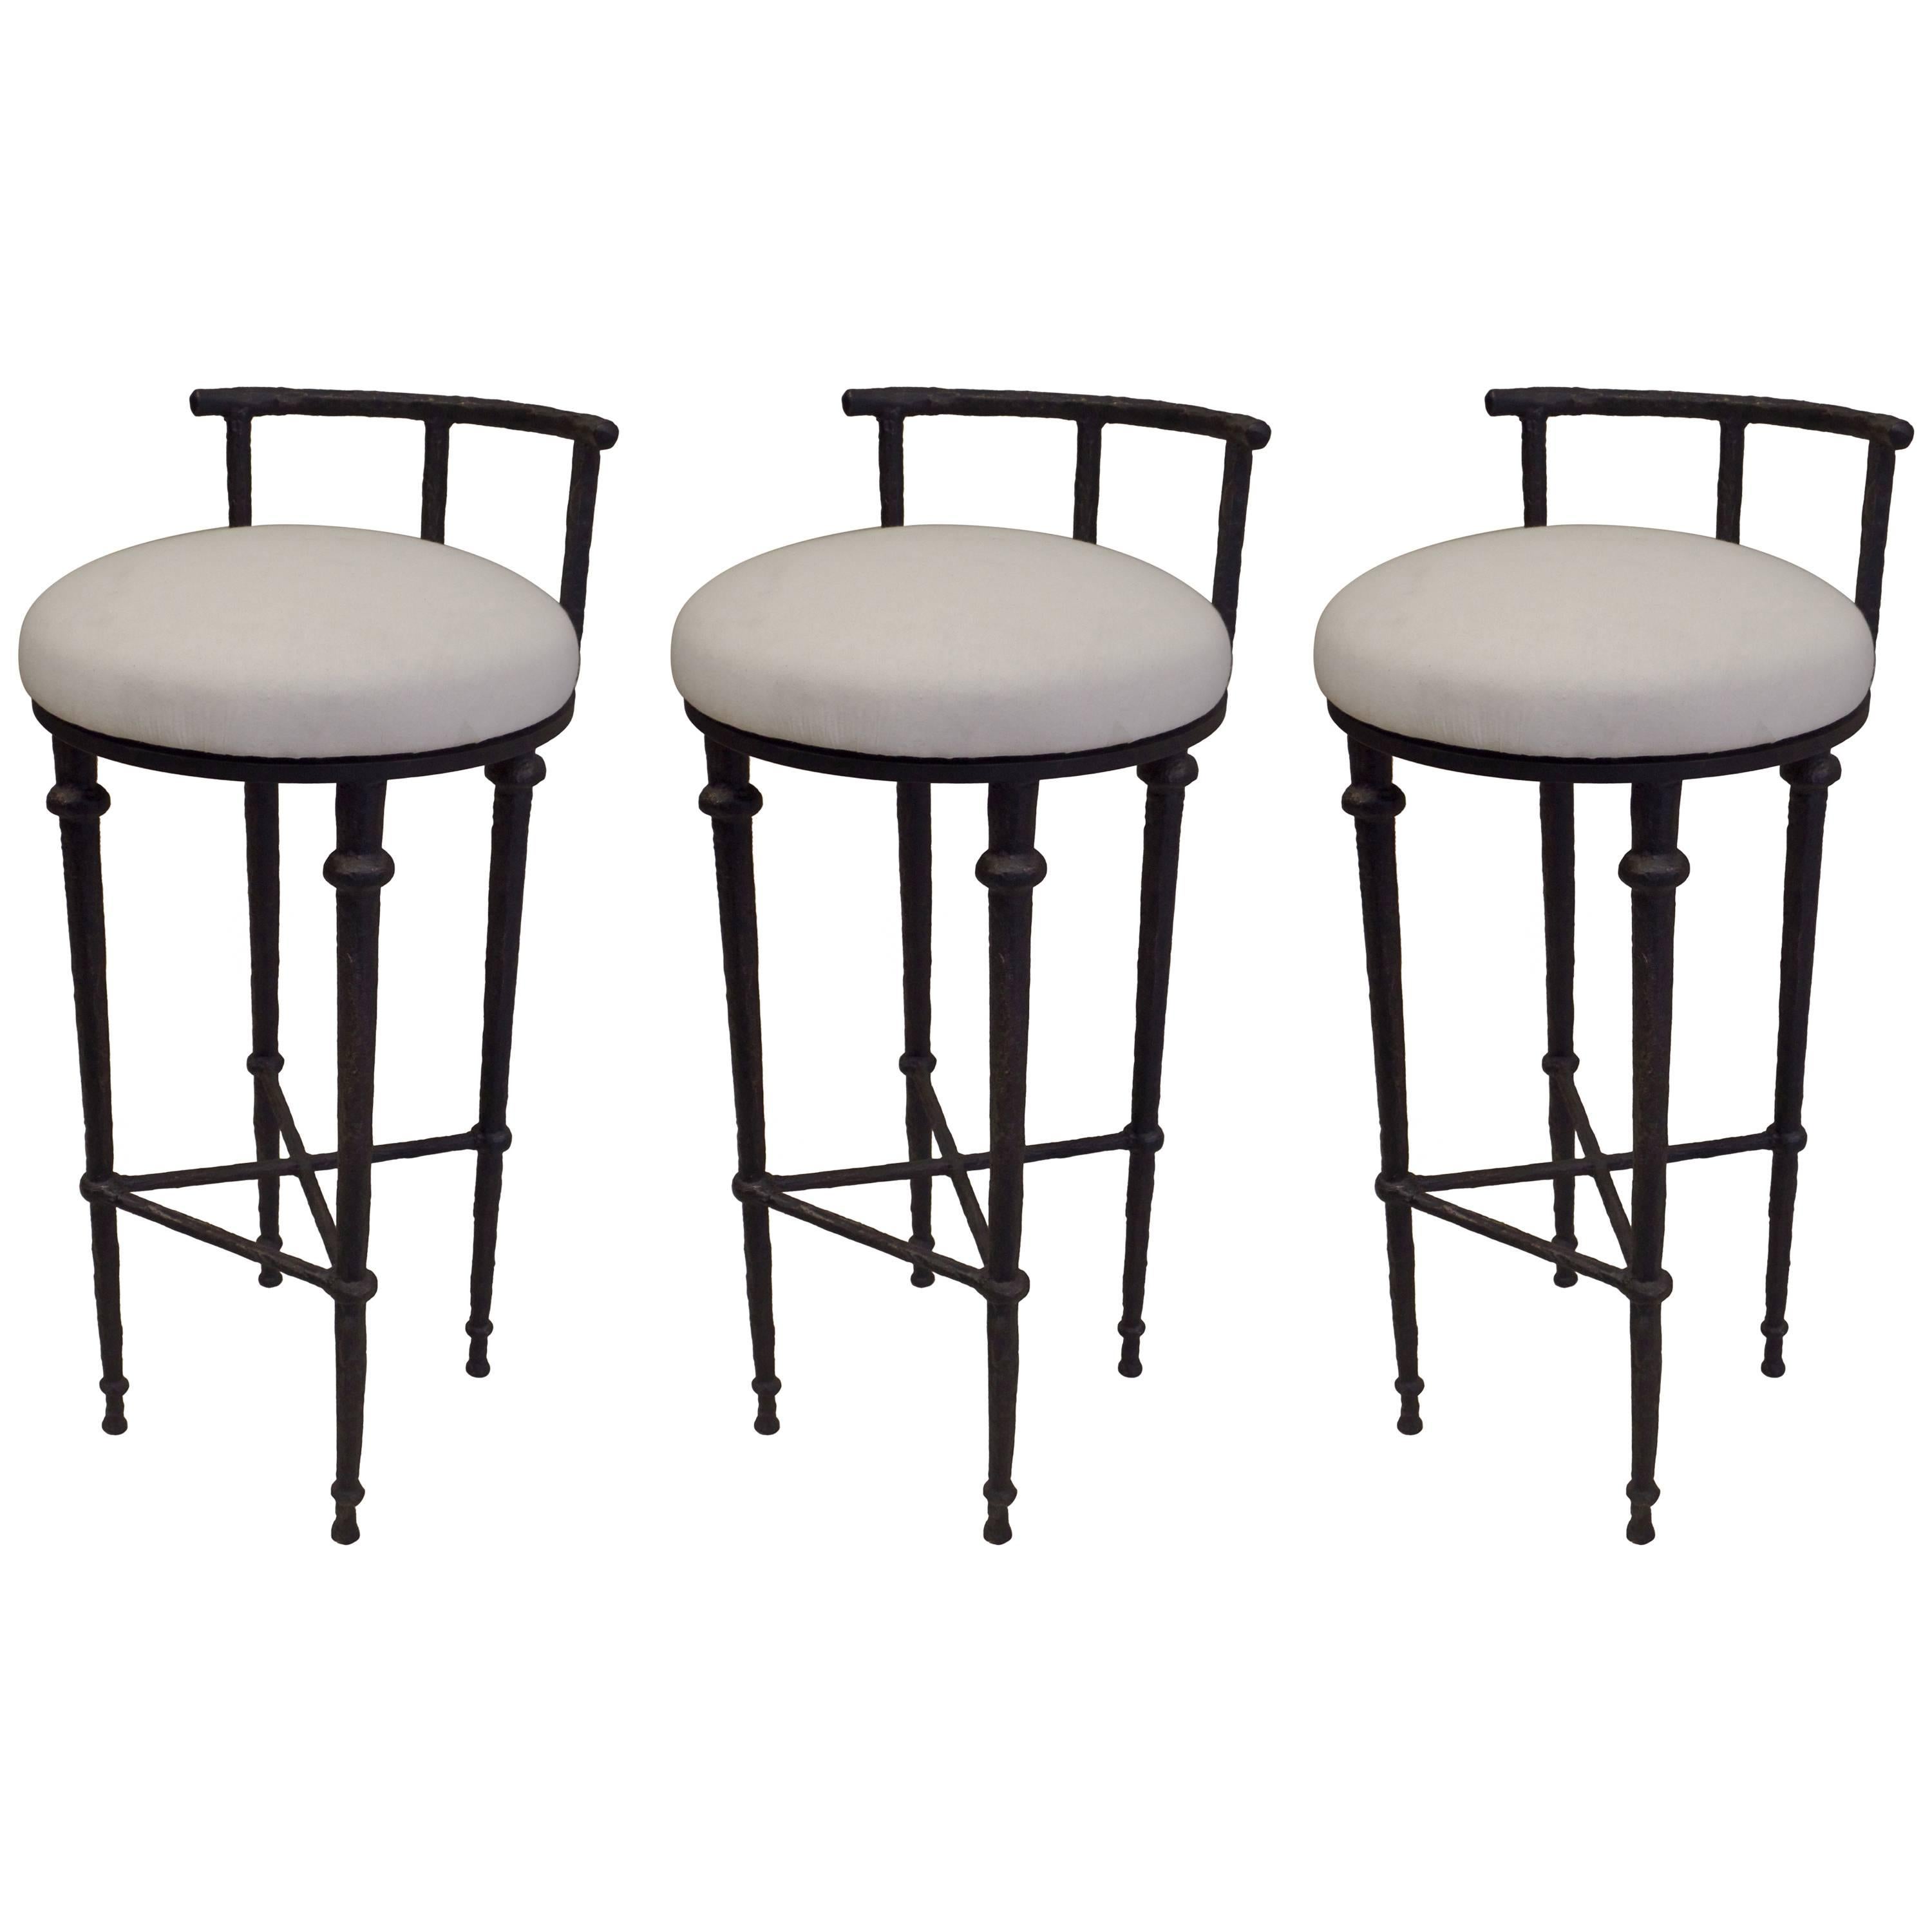 Three French Mid-Century Modern Neoclassical Solid Bronze Bar Stools, Giacometti